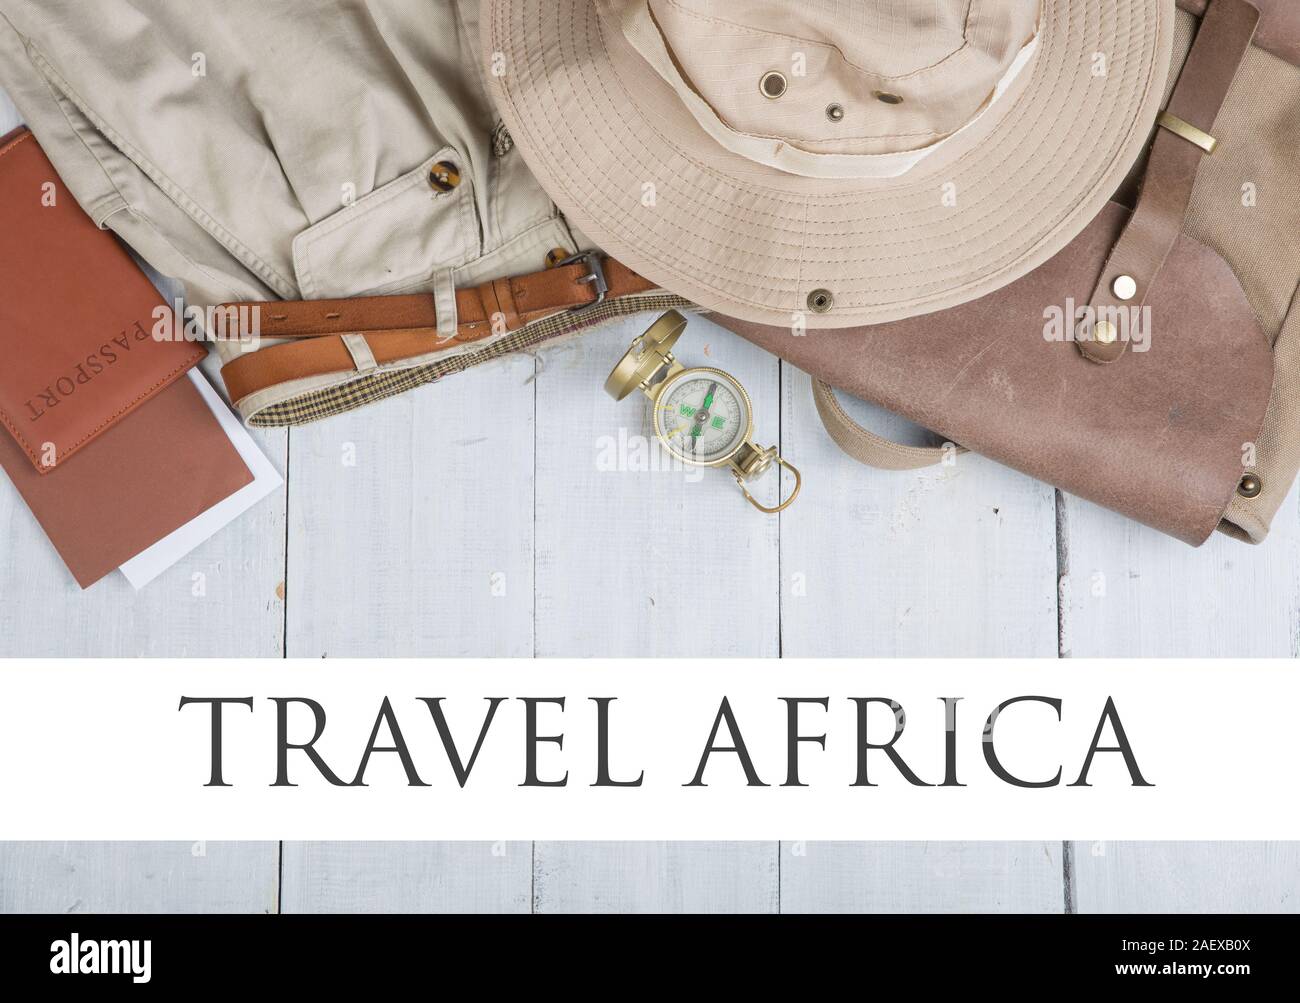 Prepare for journey in africa style - accessories and travel items, packing clothes in backpack: backpack, passport, tickets, hat, shorts, compass on Stock Photo